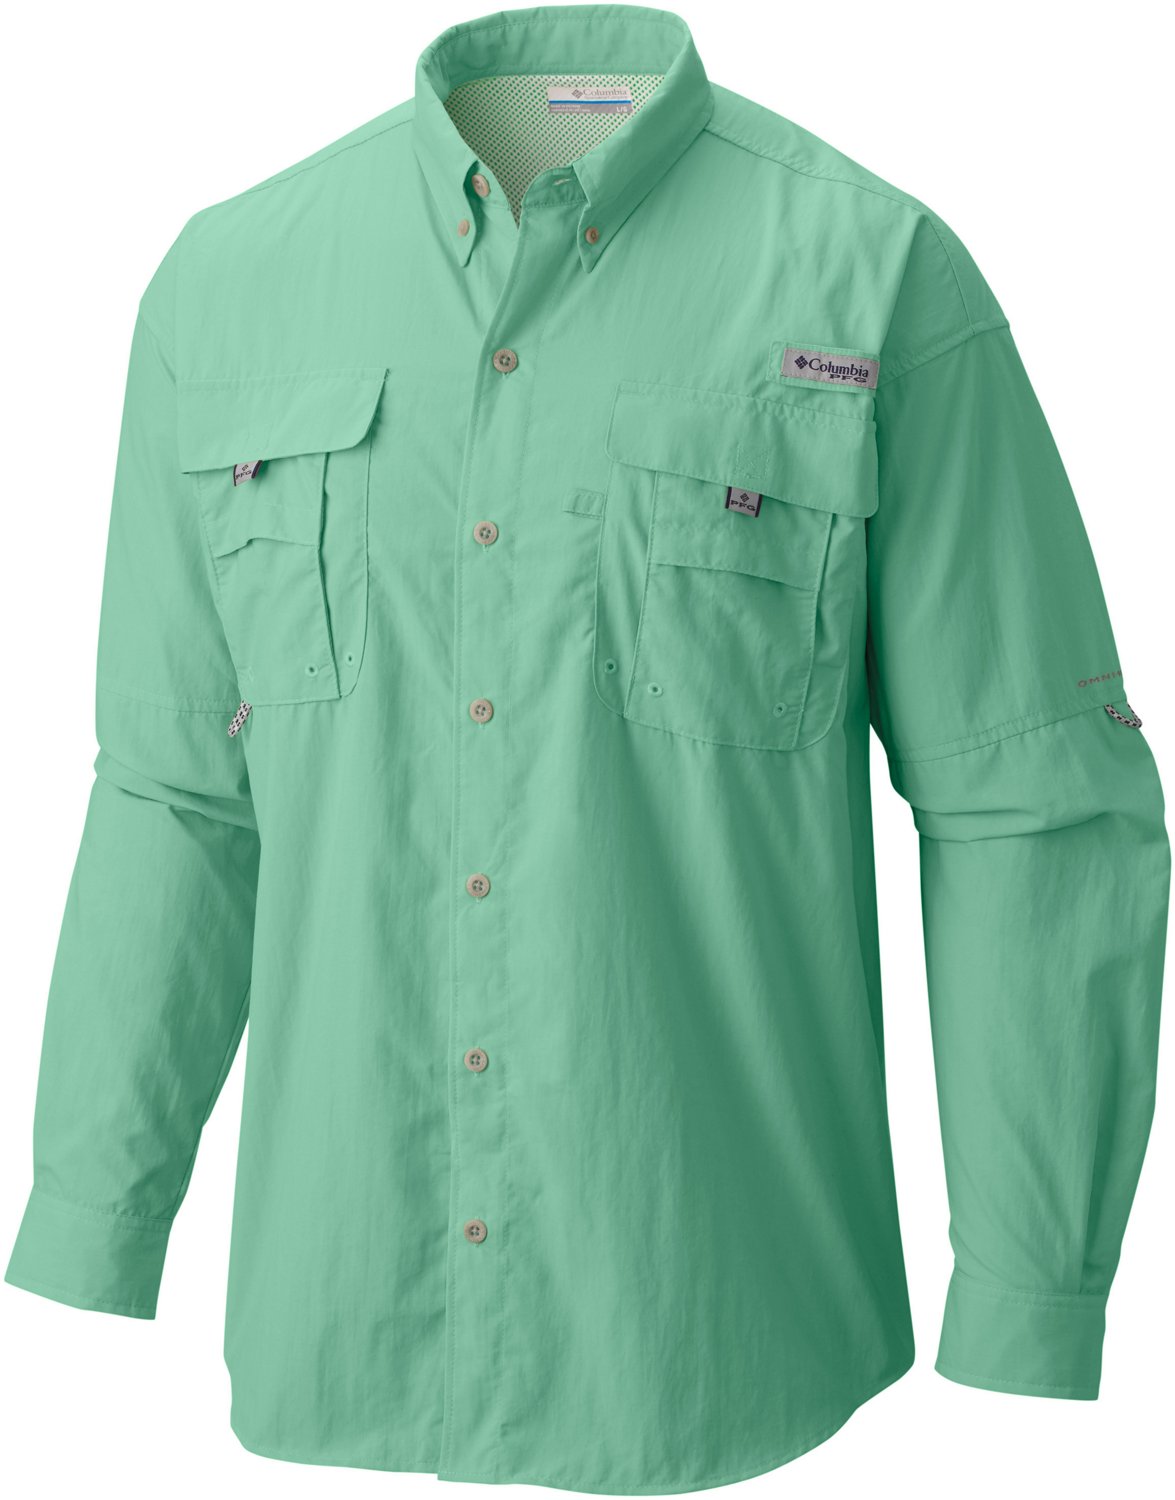 Columbia PFG Sale - Columbia Store Outlet - Columbia Sportswear